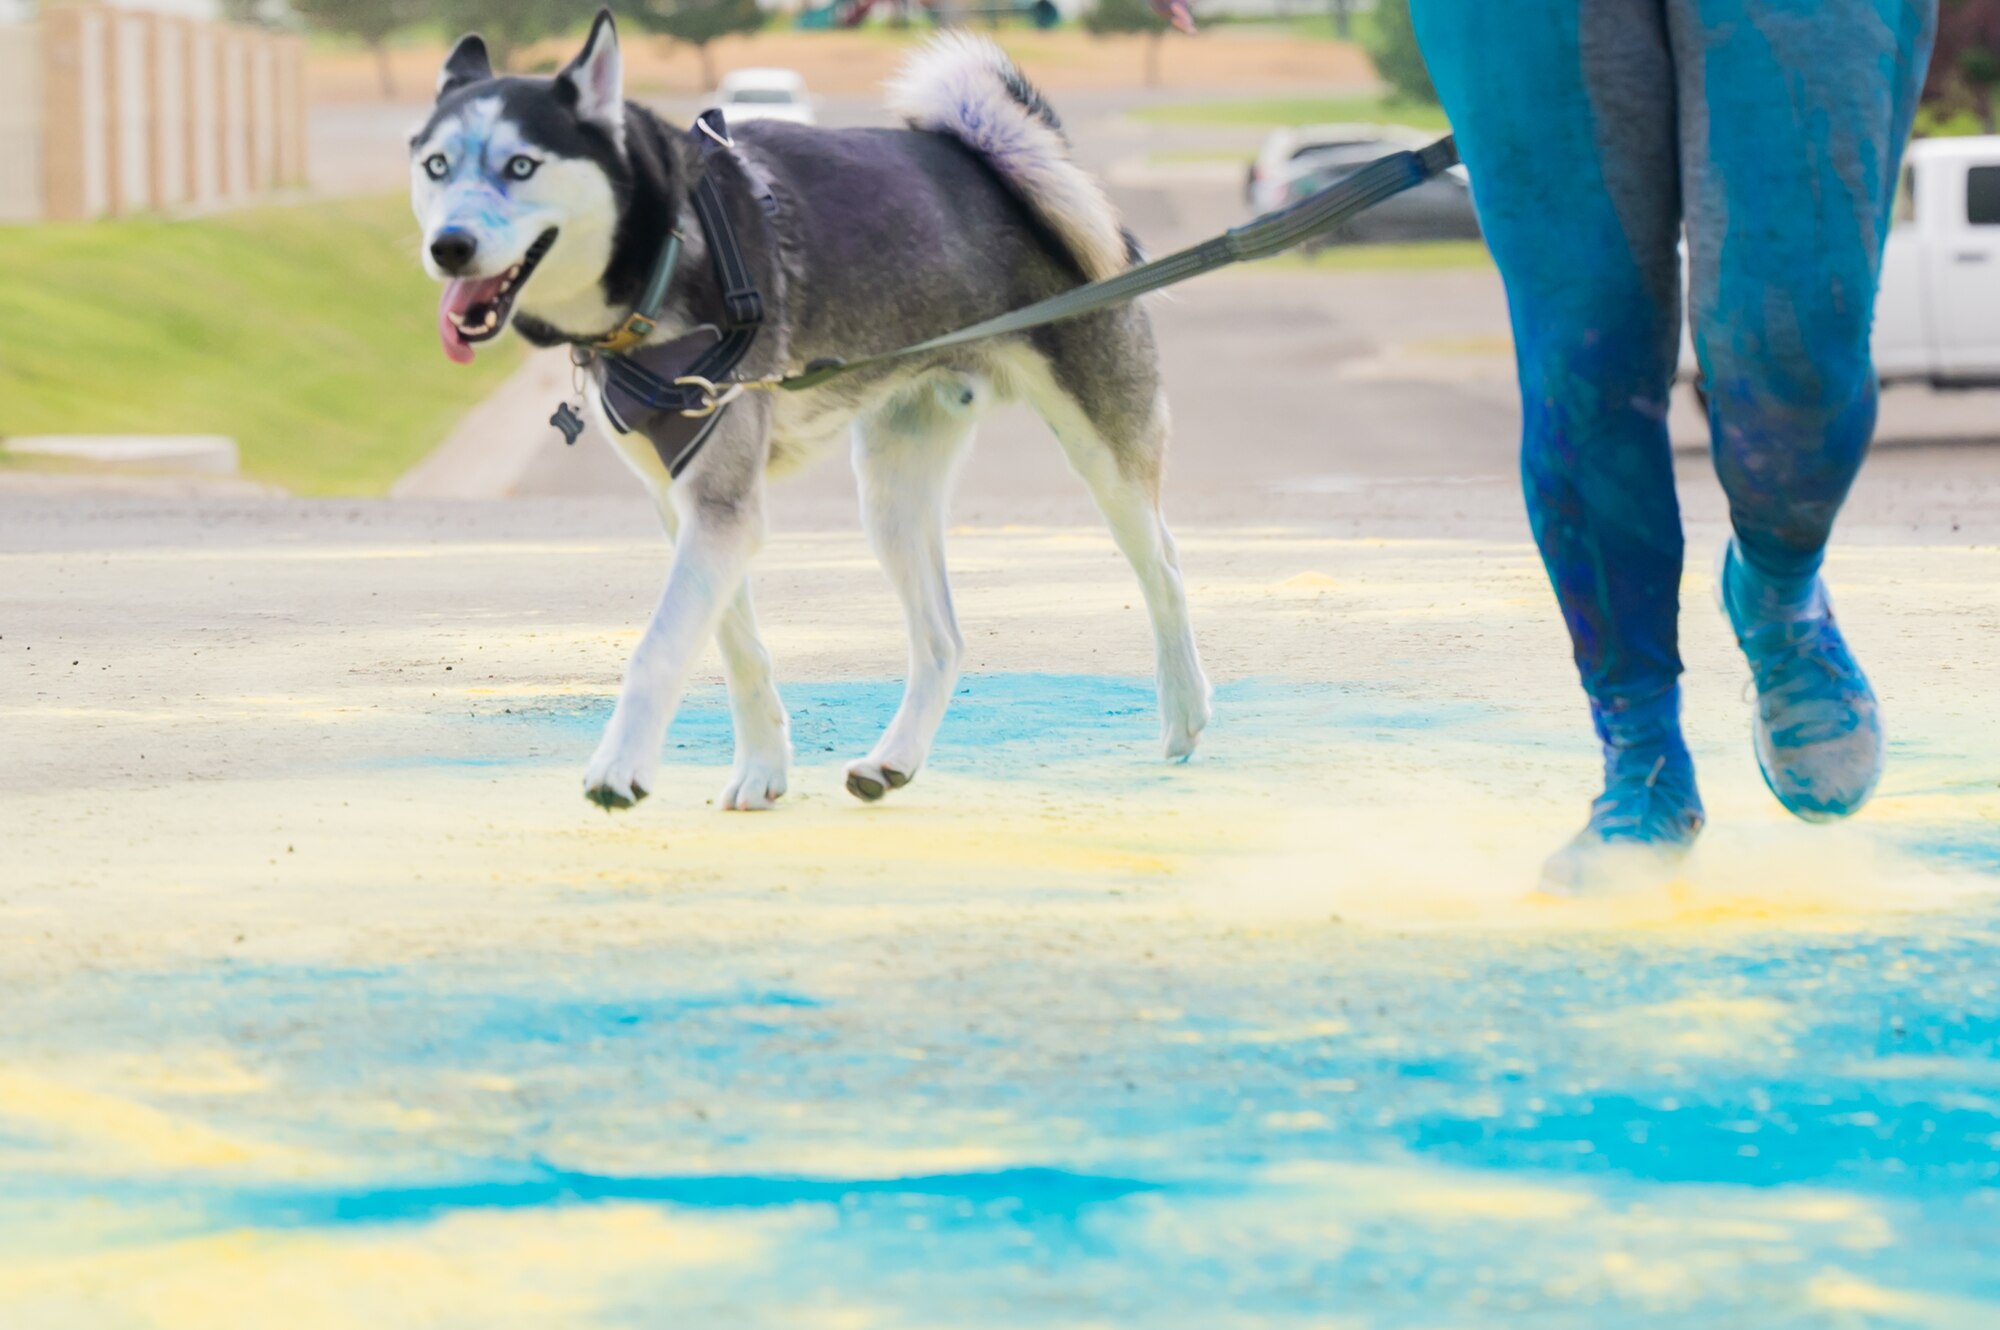 A Siberian Husky and his owner cross the finish line during a Suicide Awareness Color Run Sept. 9, 2022, at Malmstrom Air Force Base, Mont.